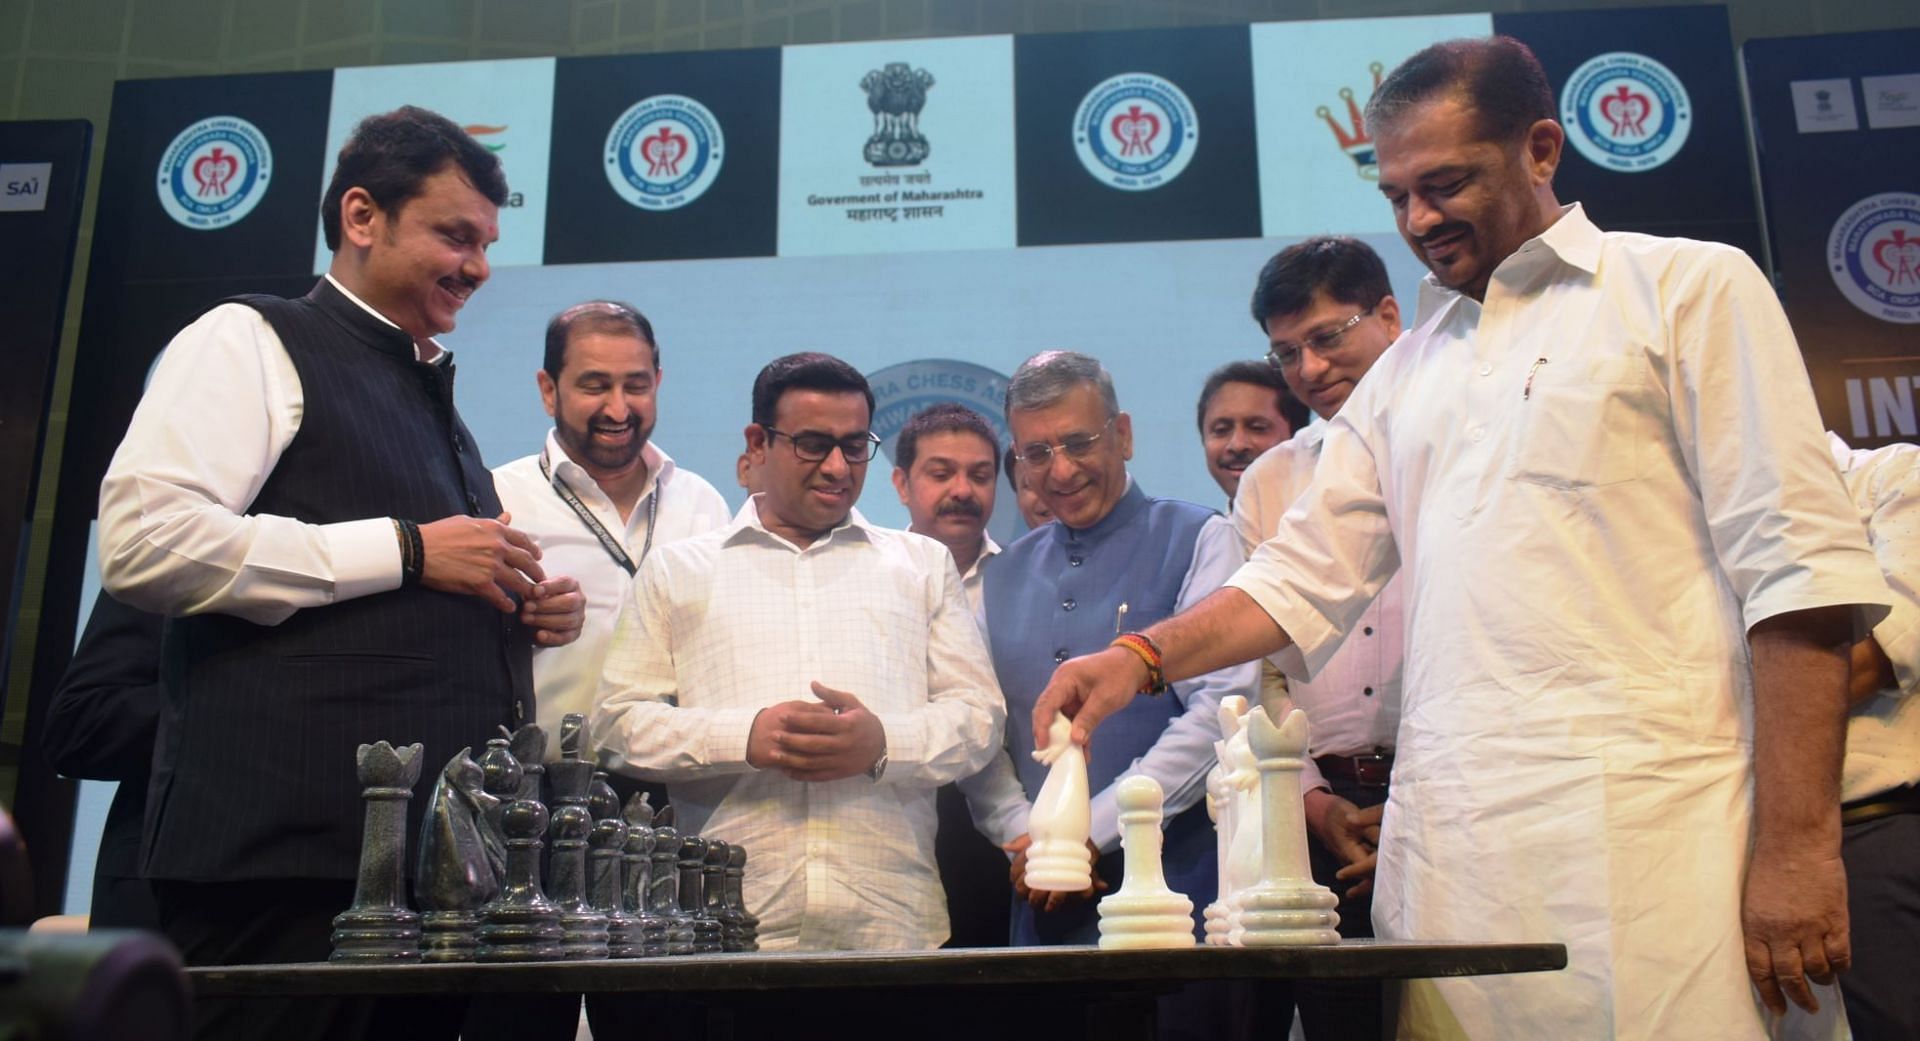 Maharashtra Sports Minister Sunil Kedar (R) making a move to mark the inauguration while Devendra Fadnavis and other guests look on. (Pic credit: AICF)